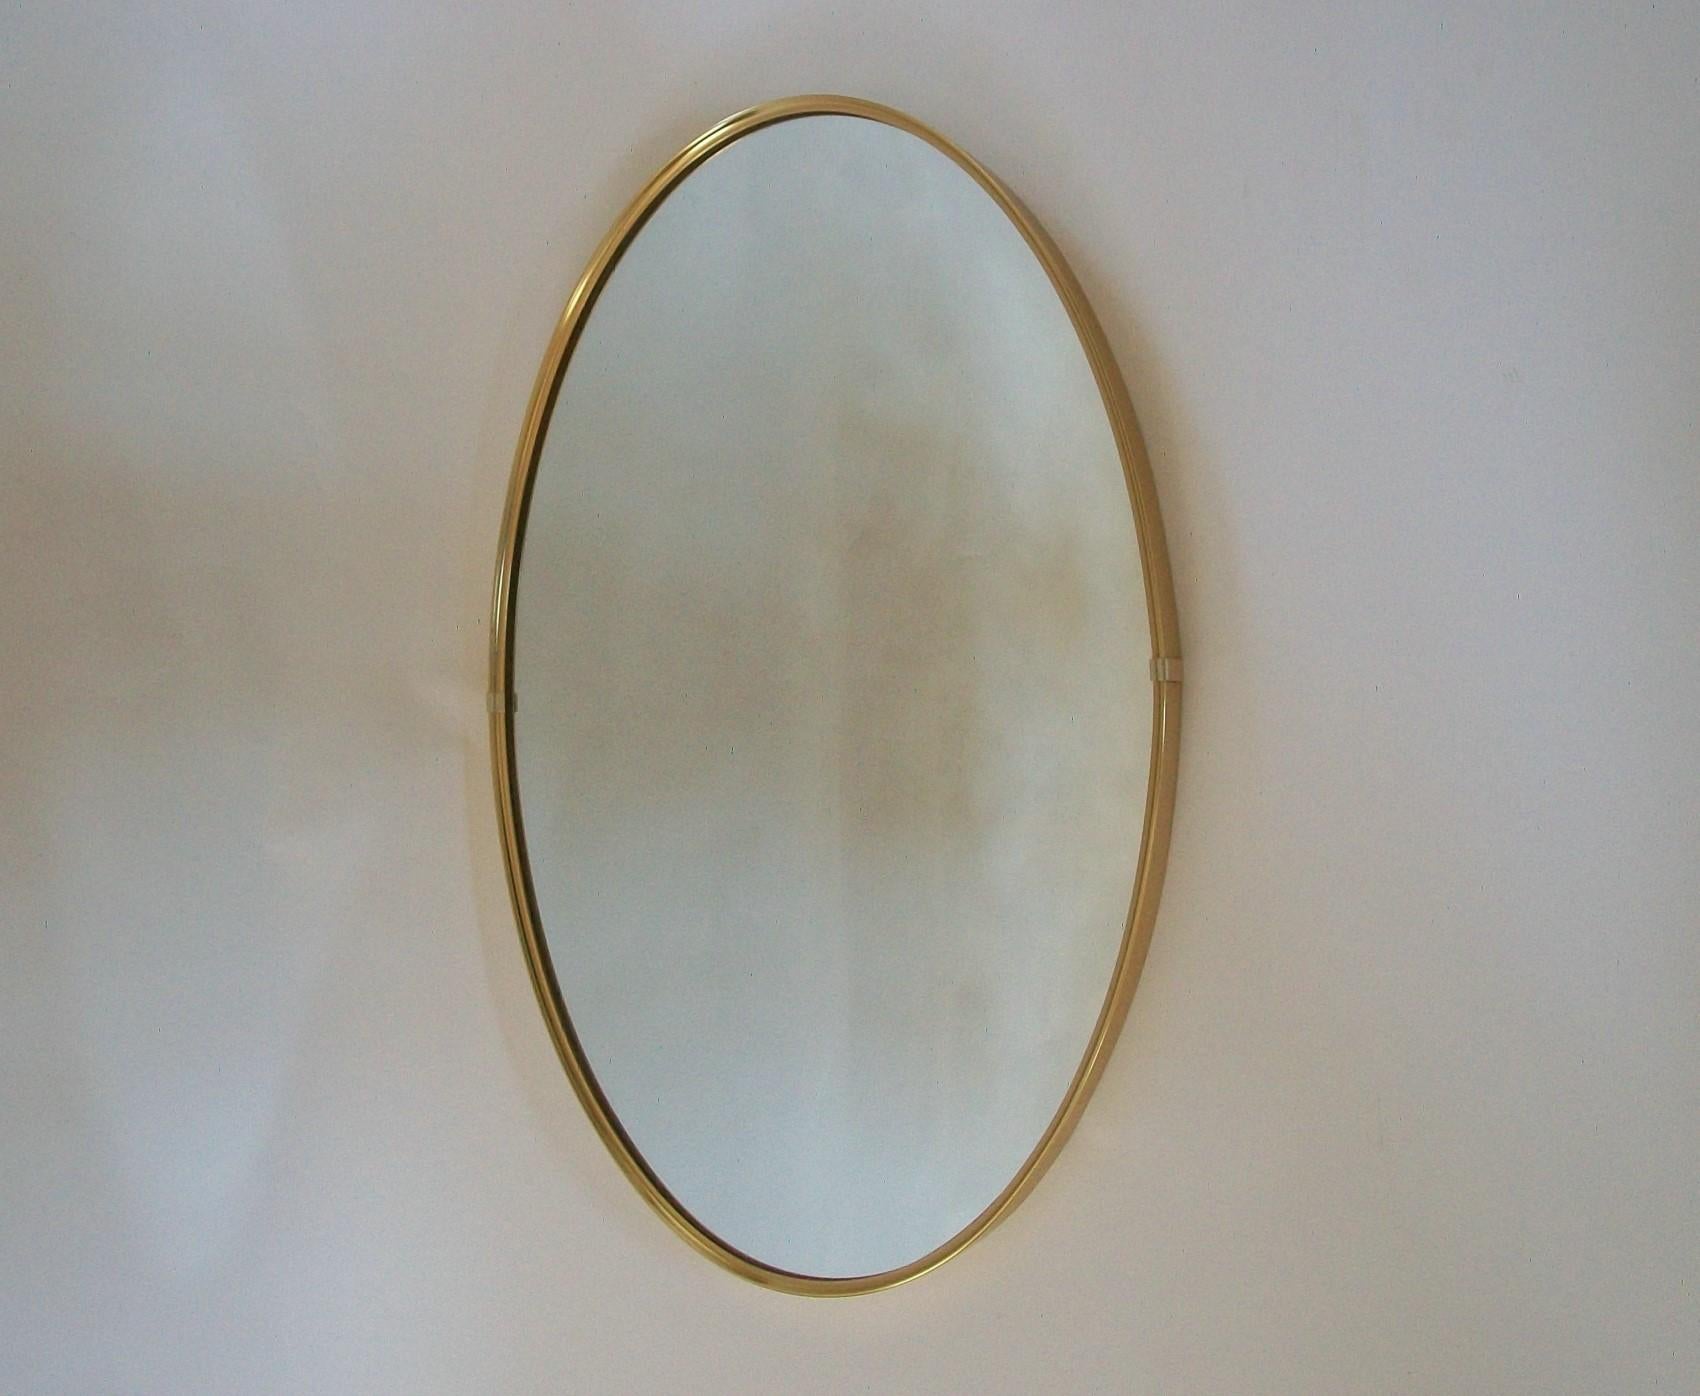 Mid-Century Modern brass framed oval mirror - exceptional quality - horizontal or vertical orientation - unsigned - Italy (likely) - circa 1970s.

Excellent vintage condition - no loss - no damage - no restoration - minor signs of age and